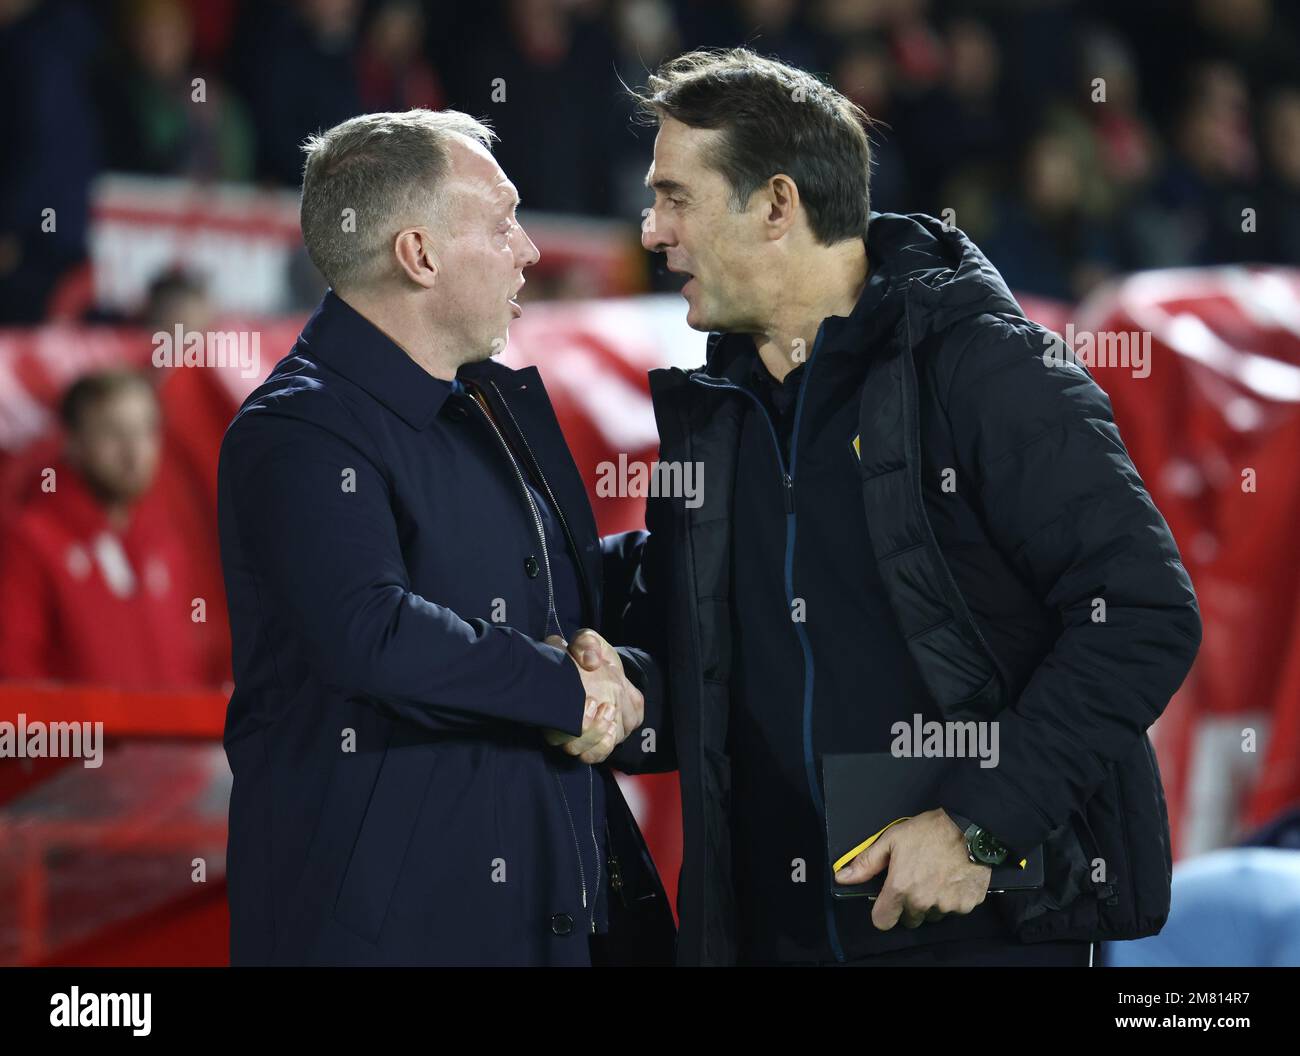 Nottingham, England, 11th January 2023.  Steve Cooper manager of Nottingham Forest greets Julen Lopetegui manager of Wolverhampton Wanderers during the Carabao Cup match at the City Ground, Nottingham. Picture credit should read: Darren Staples / Sportimage Stock Photo